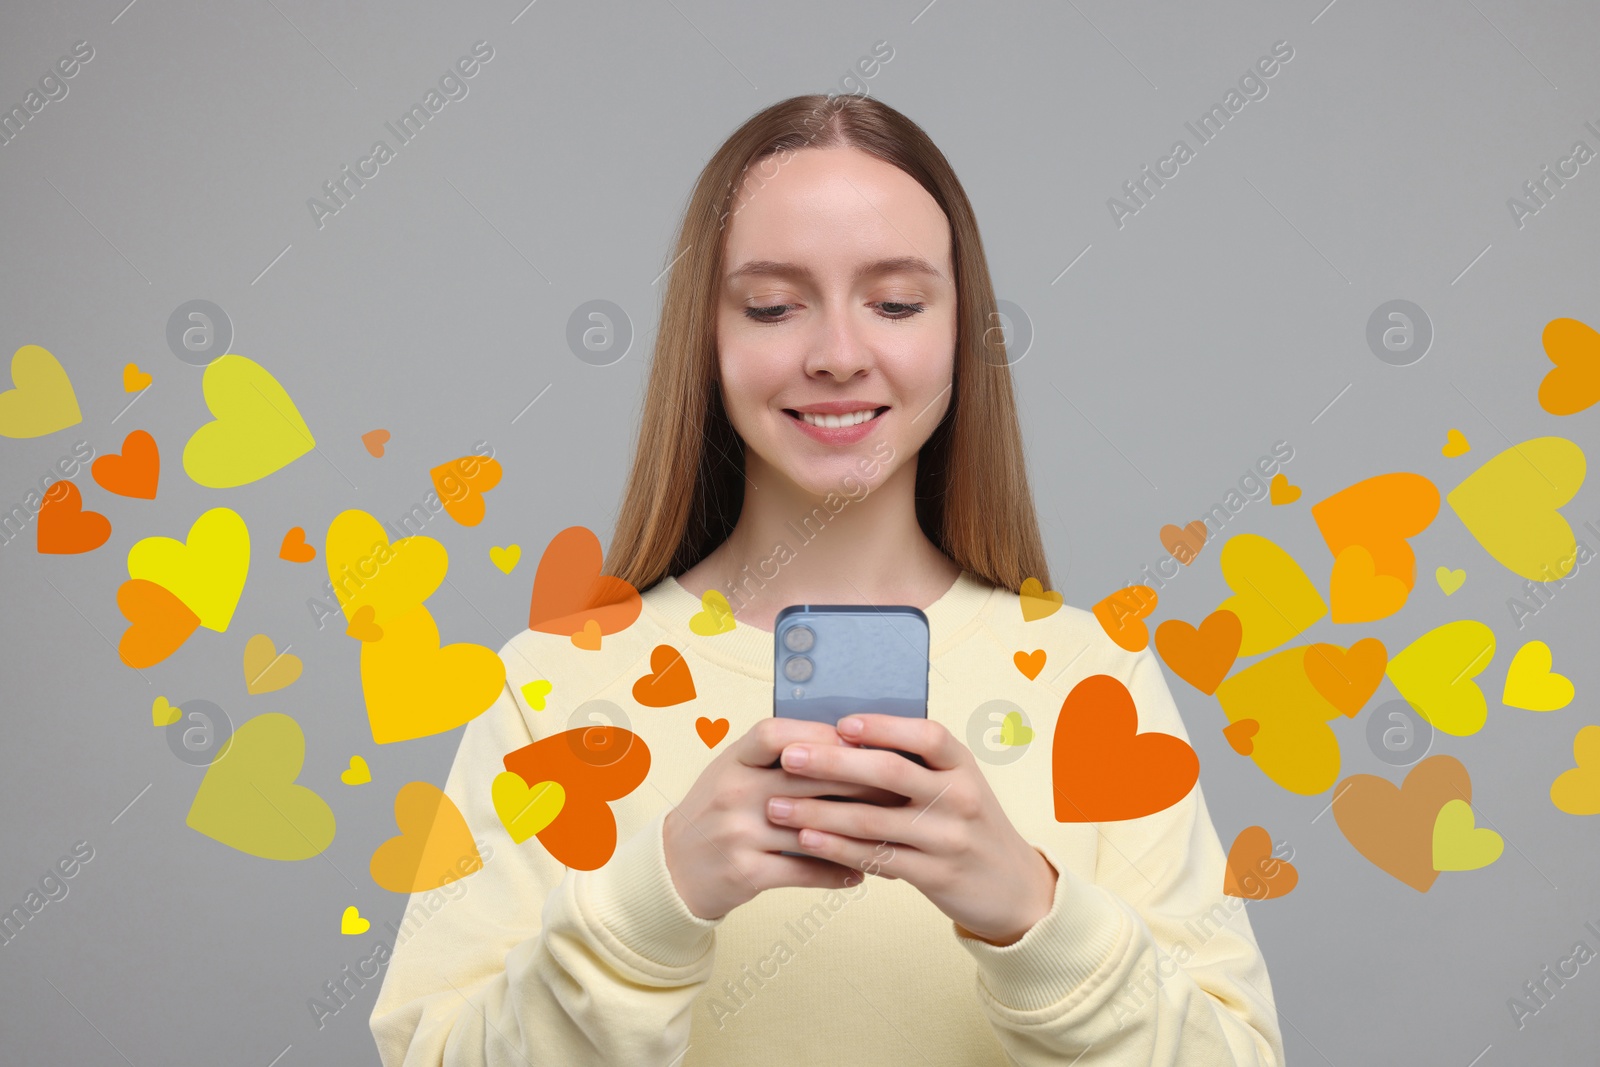 Image of Long distance love. Woman chatting with sweetheart via smartphone on grey background. Hearts flying out of device